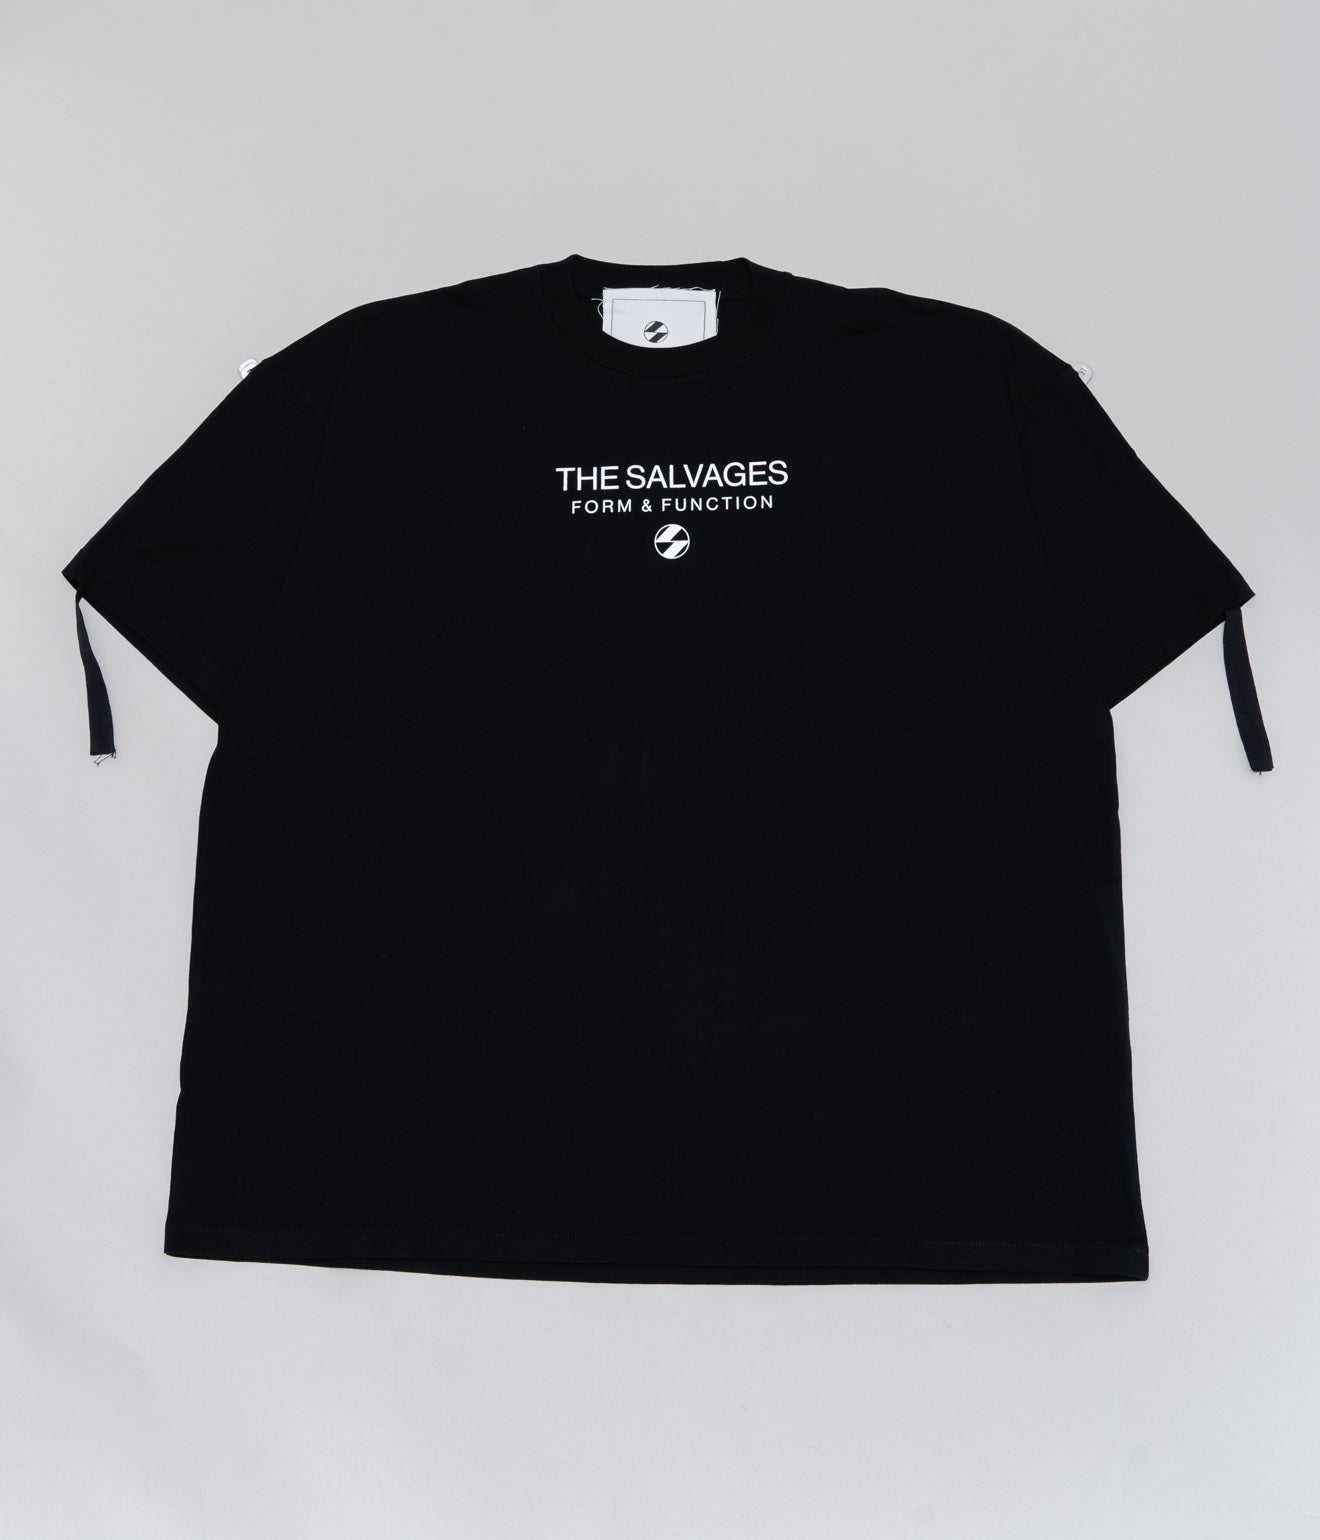 THE SALVAGES "FORM & FUNCTION D-RING OS T-SHIRT" BLACK - WEAREALLANIMALS